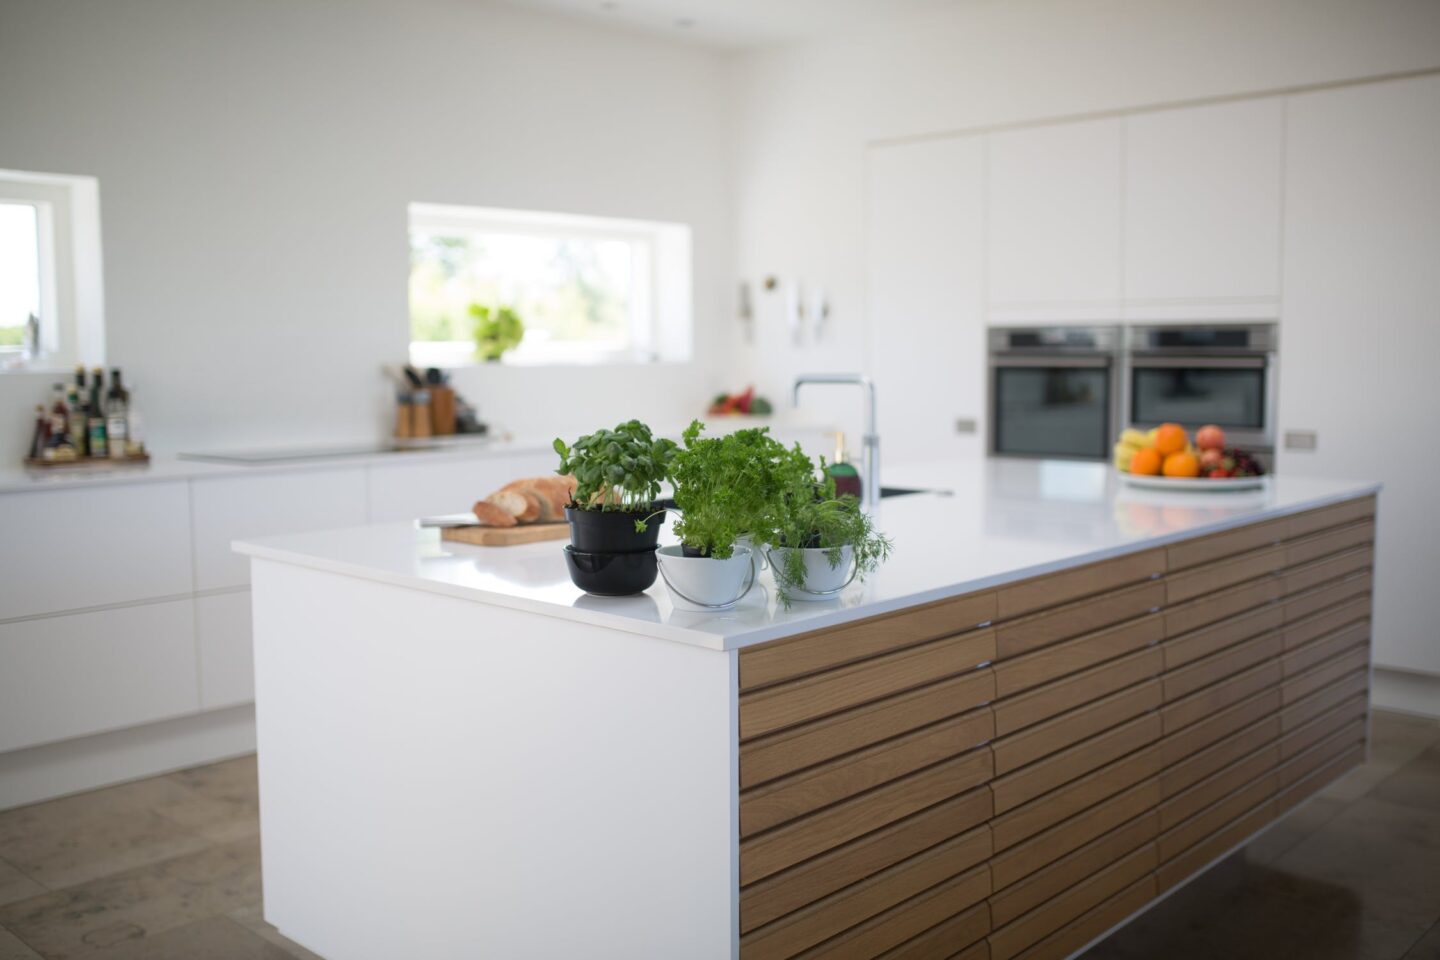 Let’s Make The Most Of Your Kitchen